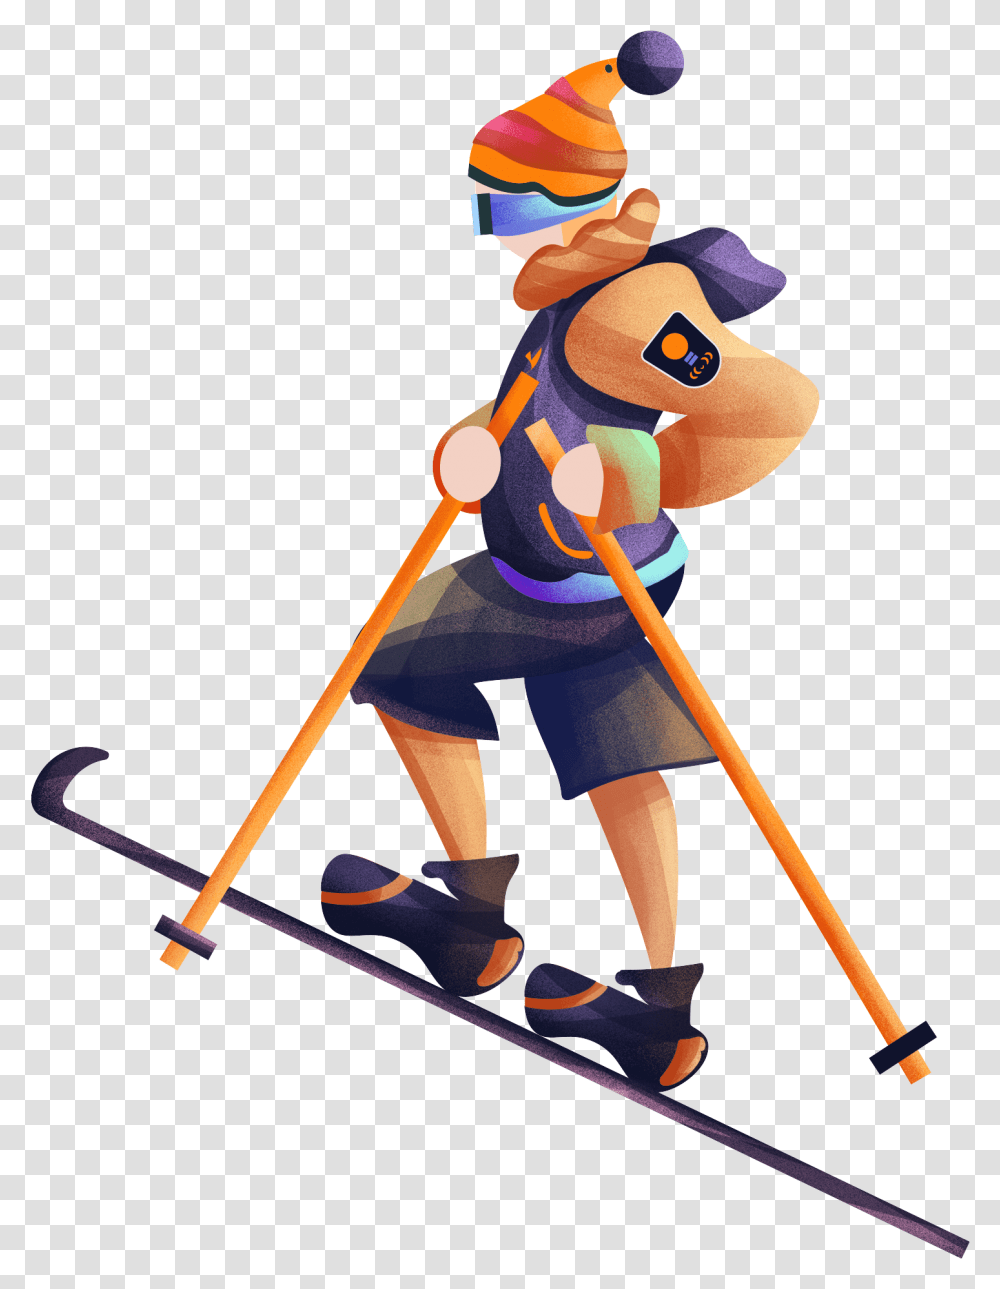 Nordic Skier Clipart Skiing, Architecture, Building, Stilts Transparent Png